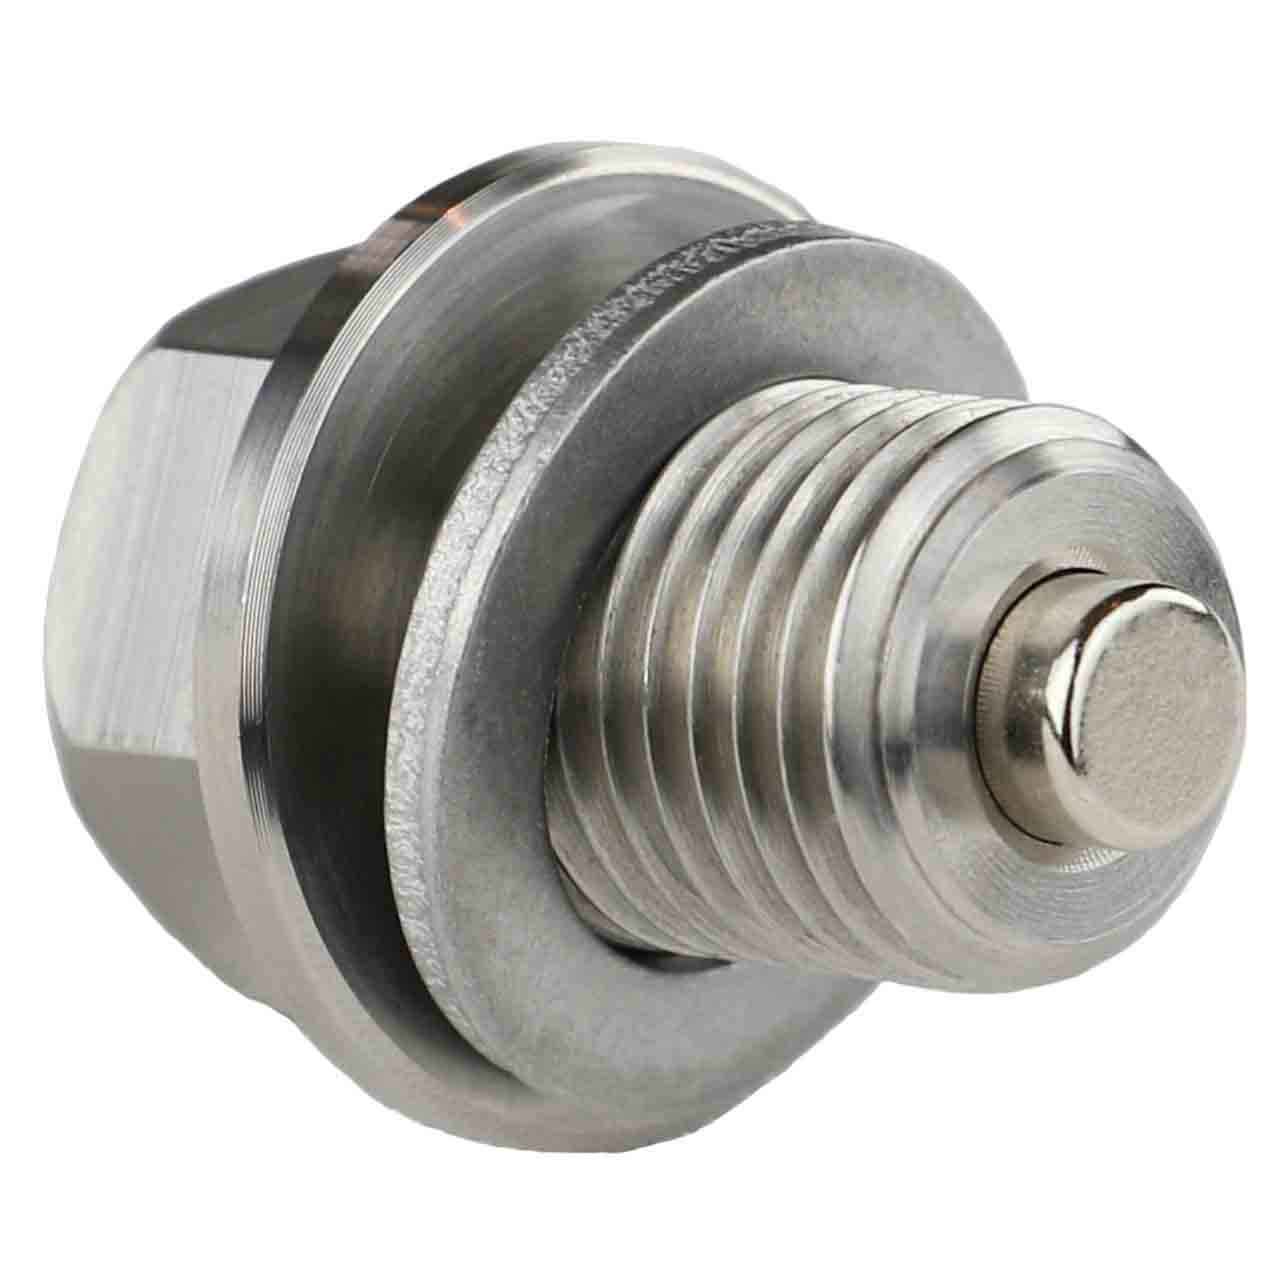 1119970330 for Mercedes - Stainless Steel Magnetic Oil Drain Plug with Neodymium Magnet - Made In USA